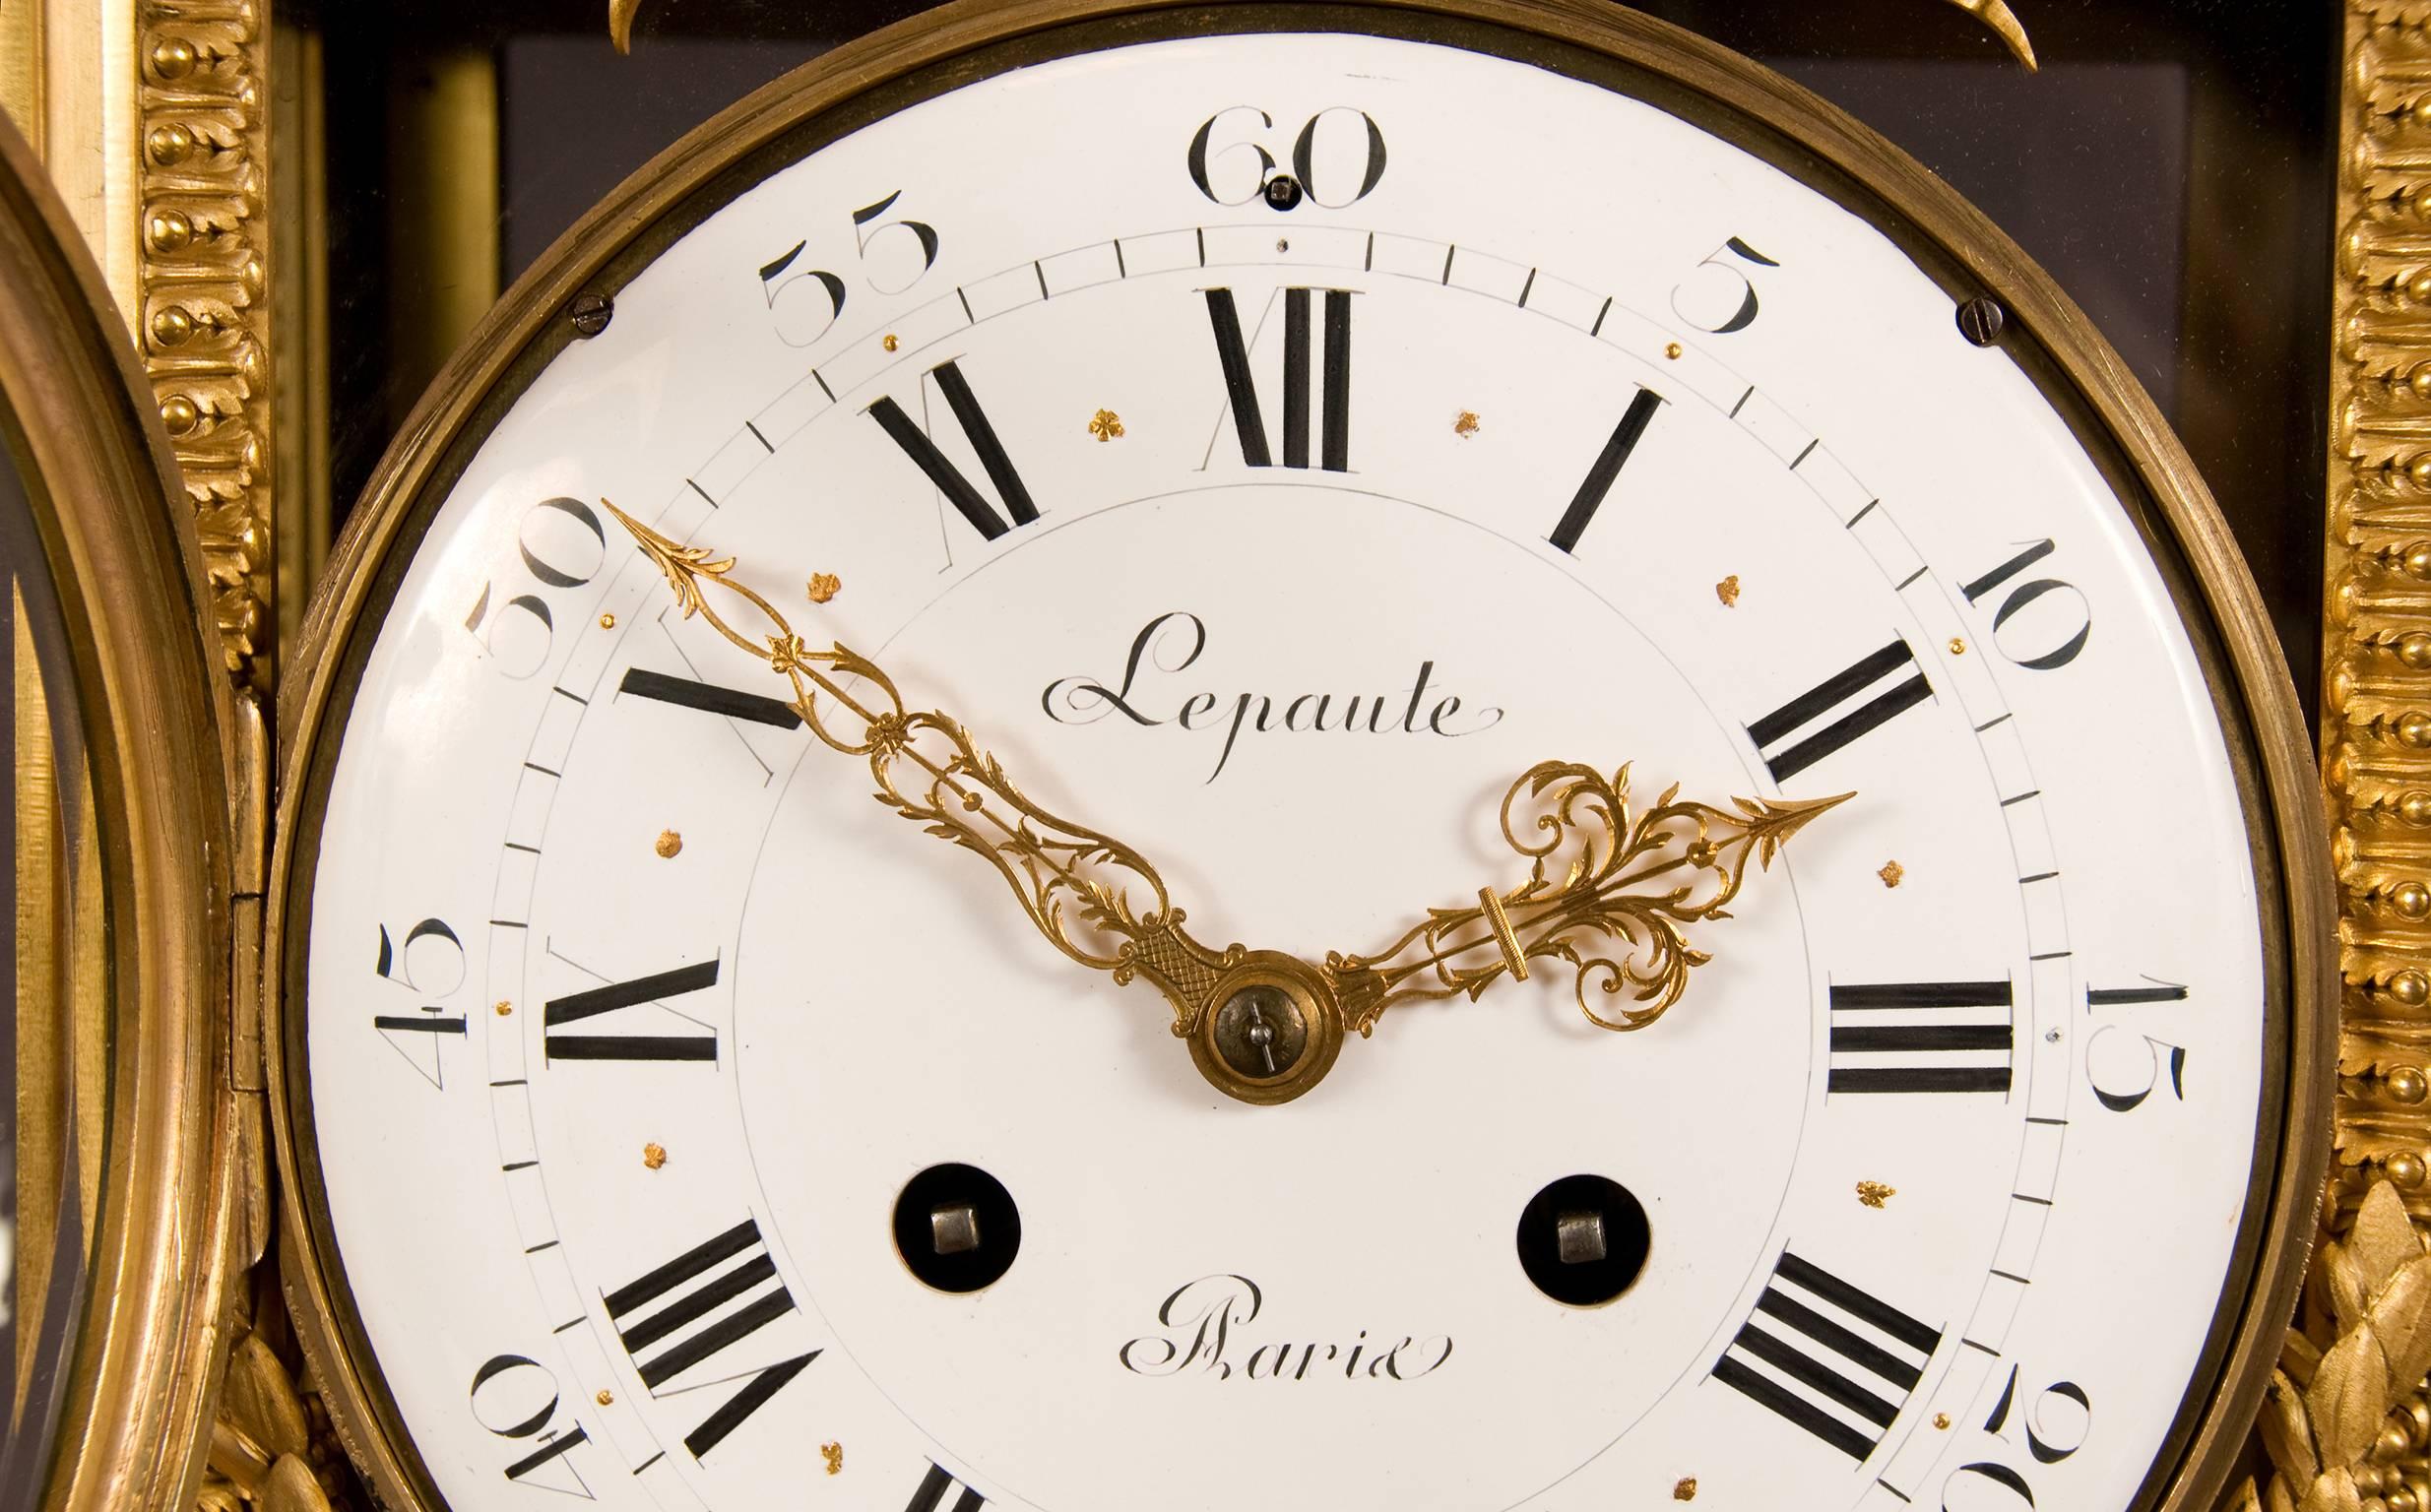 A very nice Louis XVI style mantel clock in a glass cage, 16.5 cm enamel flower garland dial, with gilt half hour marks, Roman numerals for the hours, Arabic minute indications and gilt hands. Signed on the dial Lepaute a Paris. Mounted in a gilt